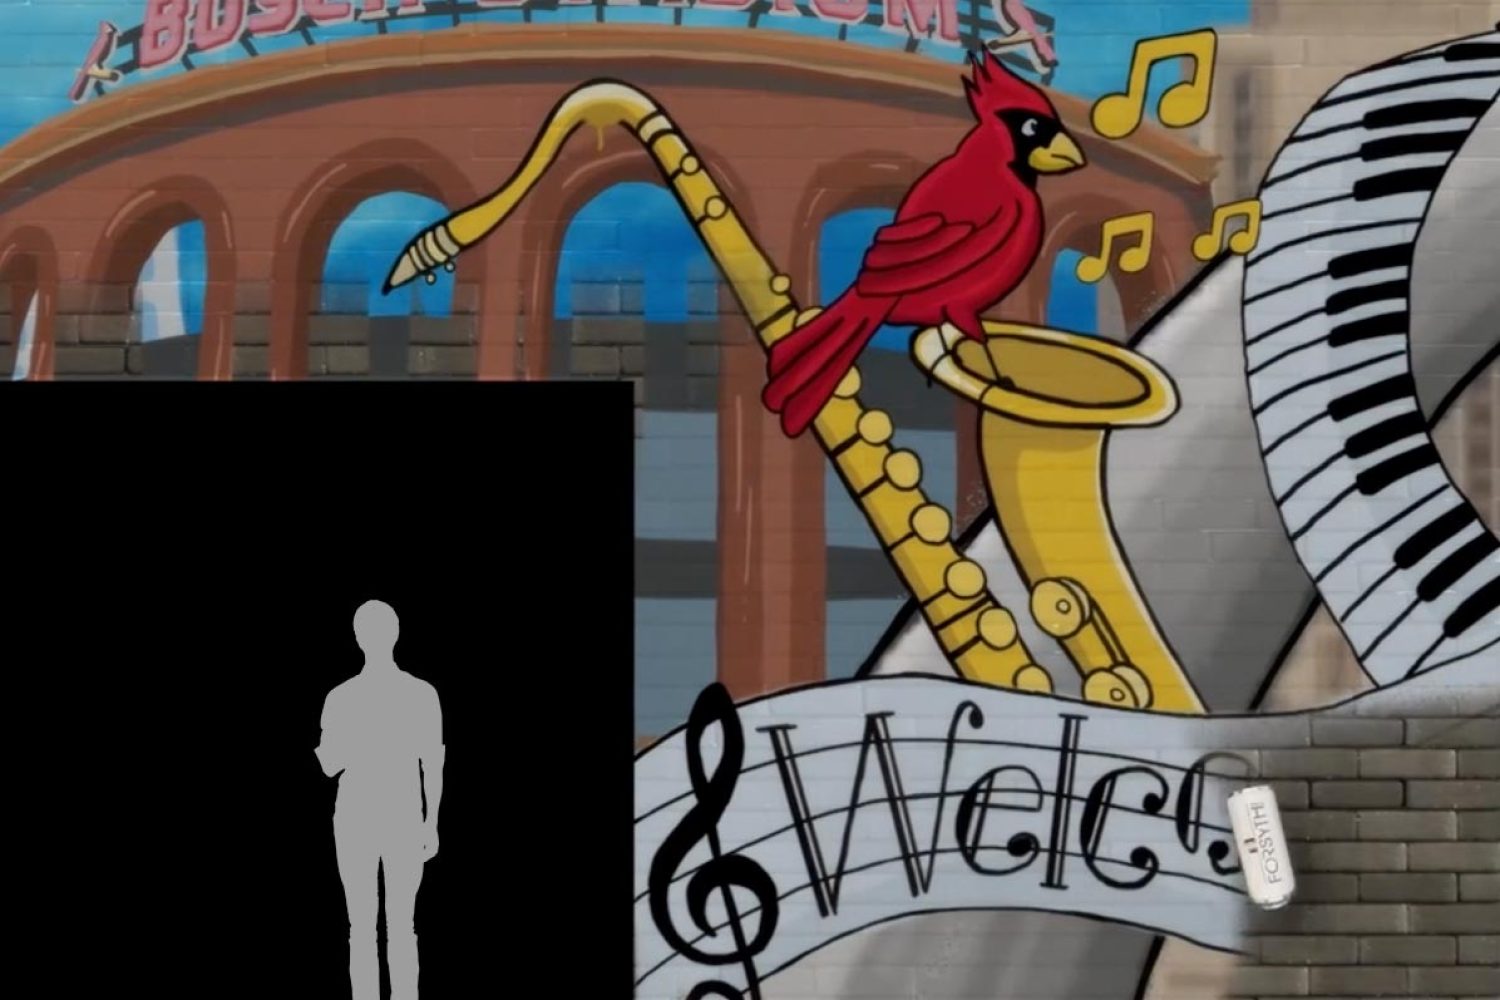 A colorful mural of a red bird playing a saxophone in front of an archway with musical notes and the word "Welcome."